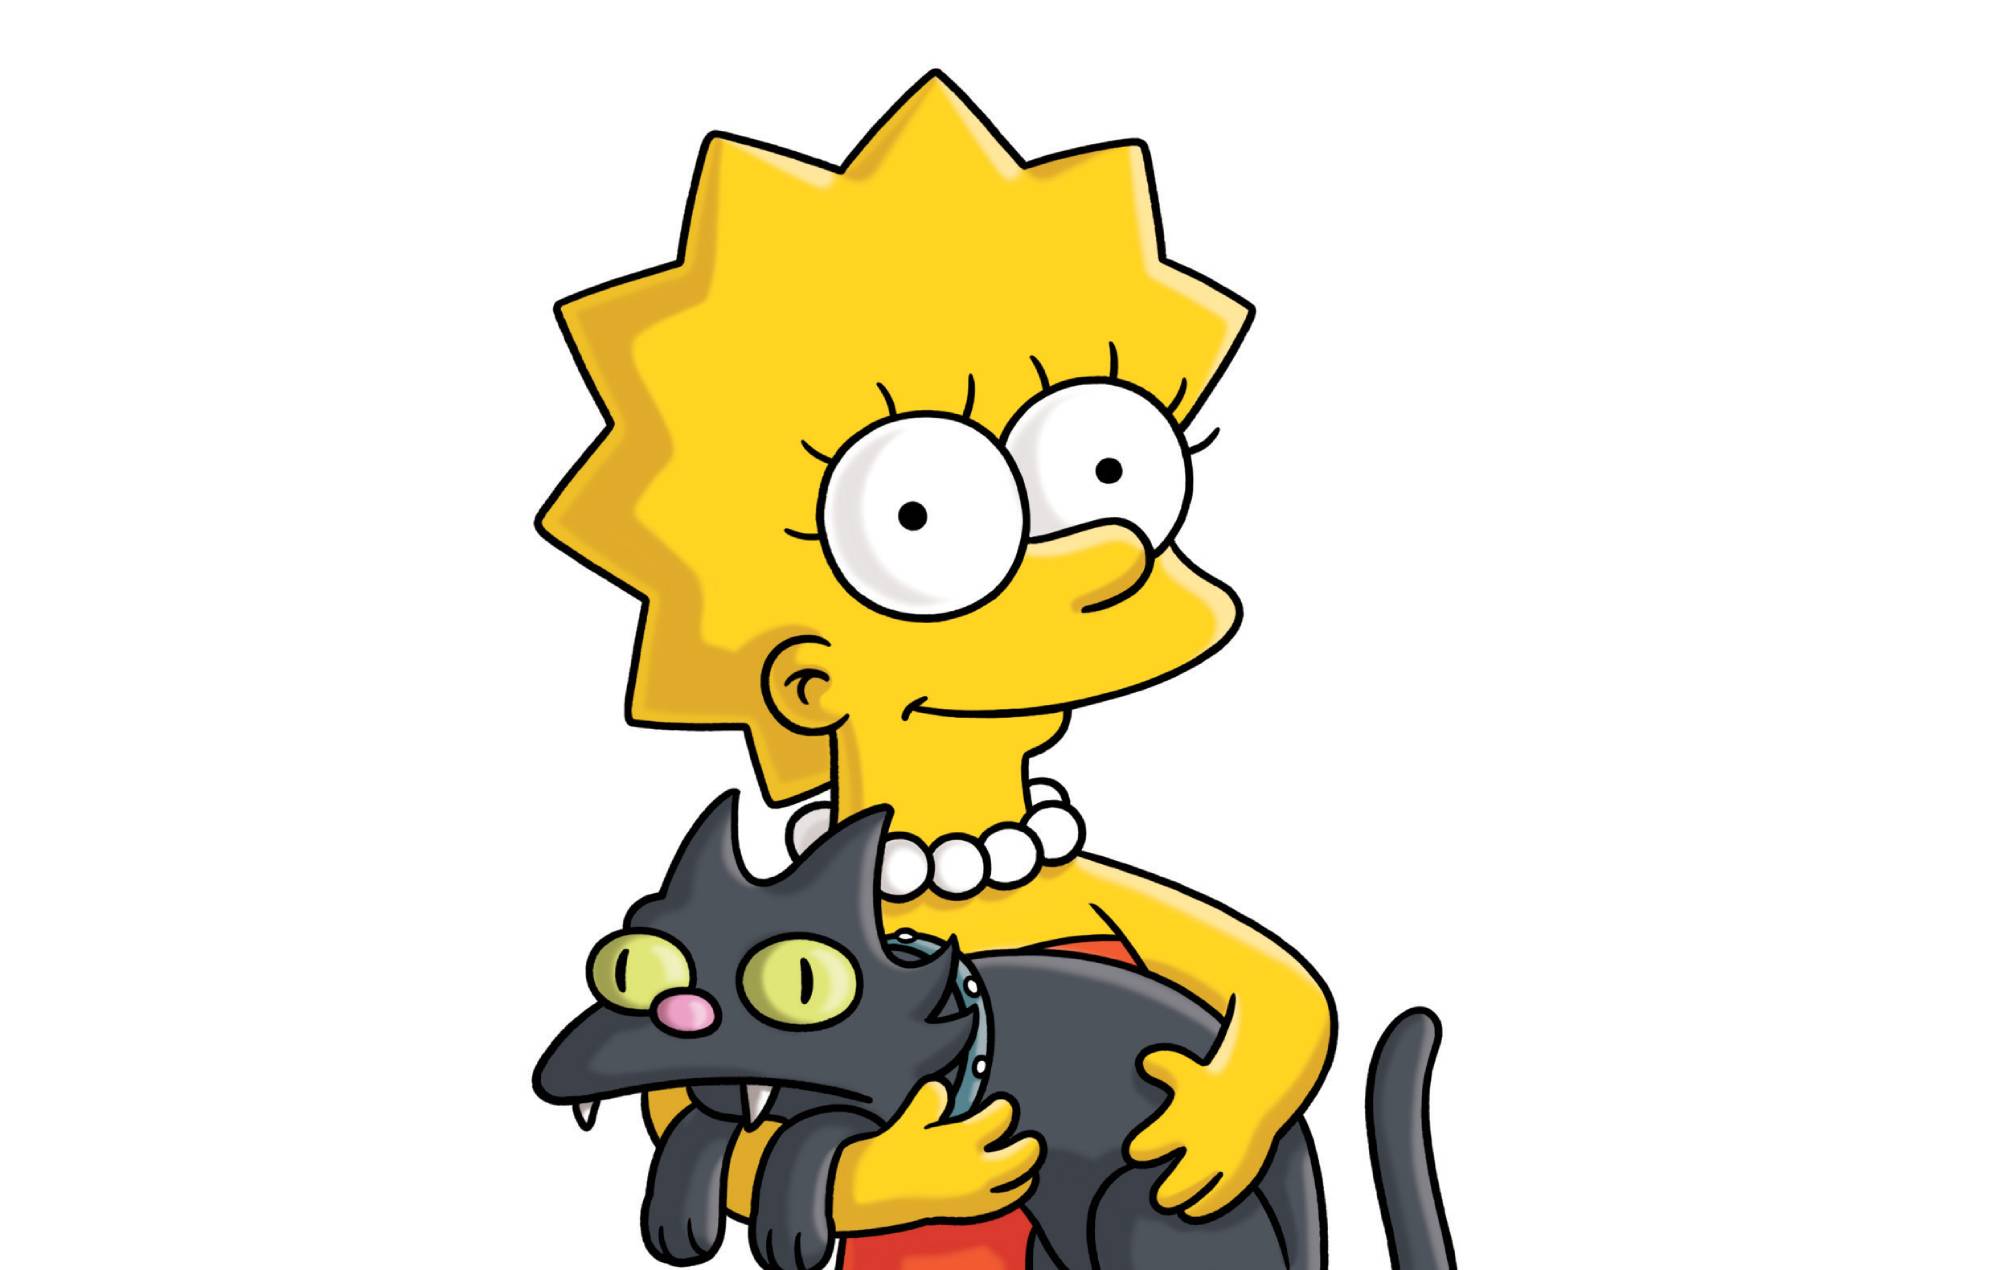 Lisa Simpson murders classic character in new Treehouse Of Horror episode